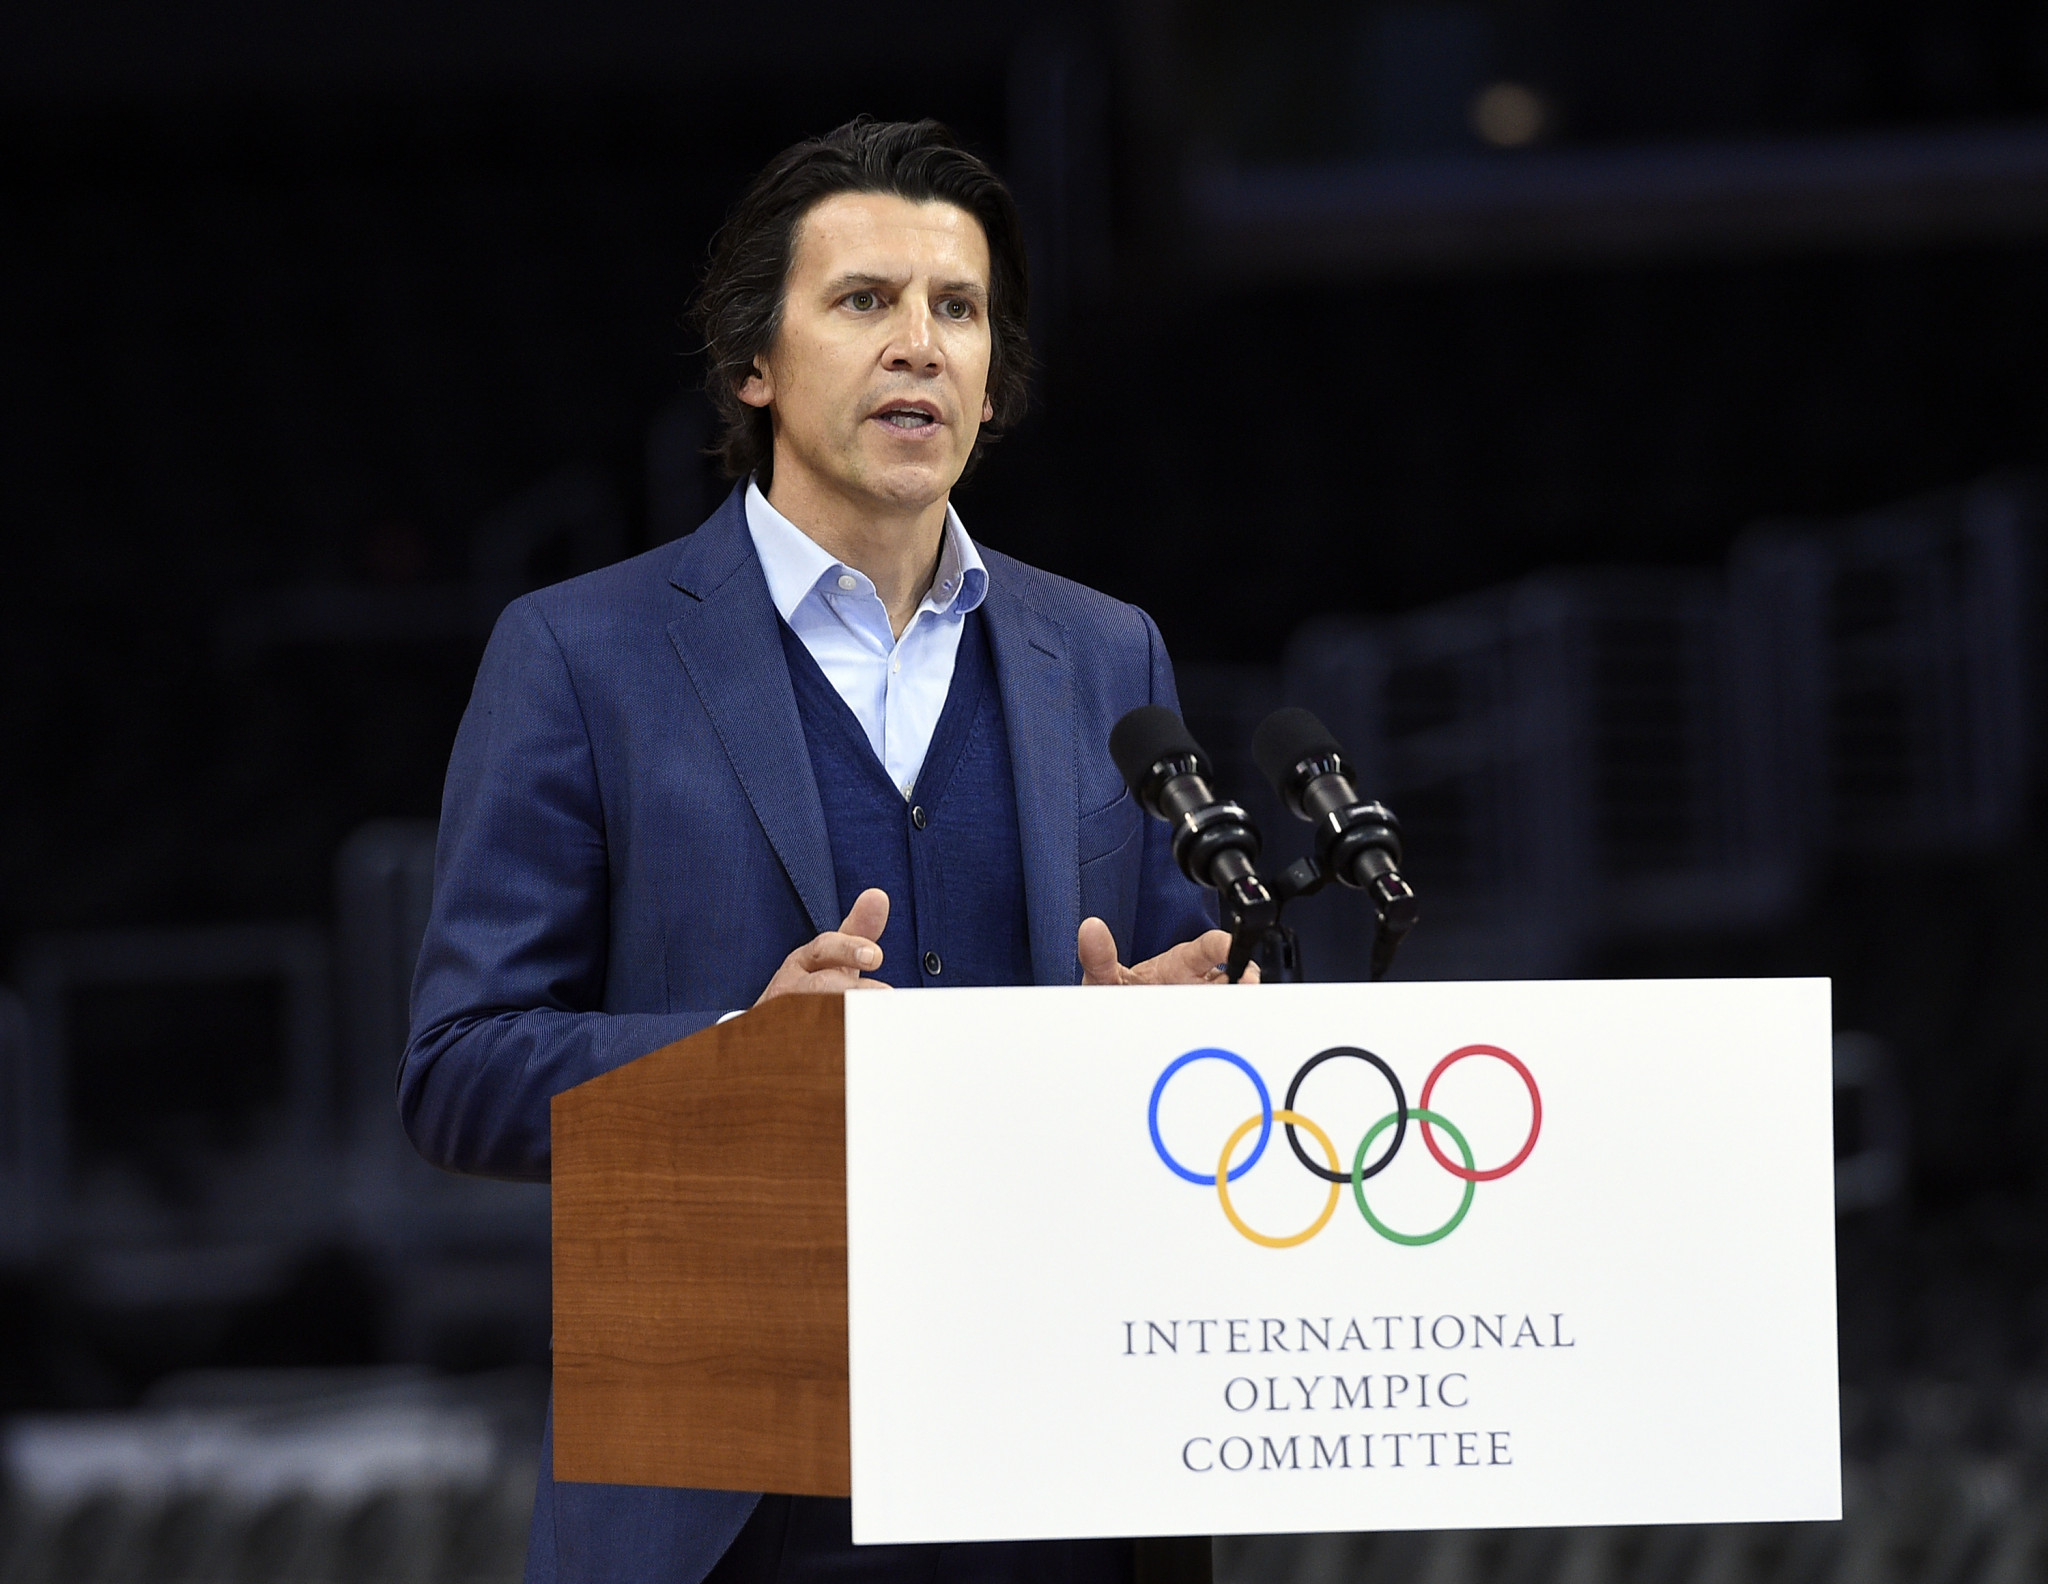 IOC executive director for the Olympic Games Christophe Dubi has outlined the savings they aim to make regarding the Winter Games ©Getty Images